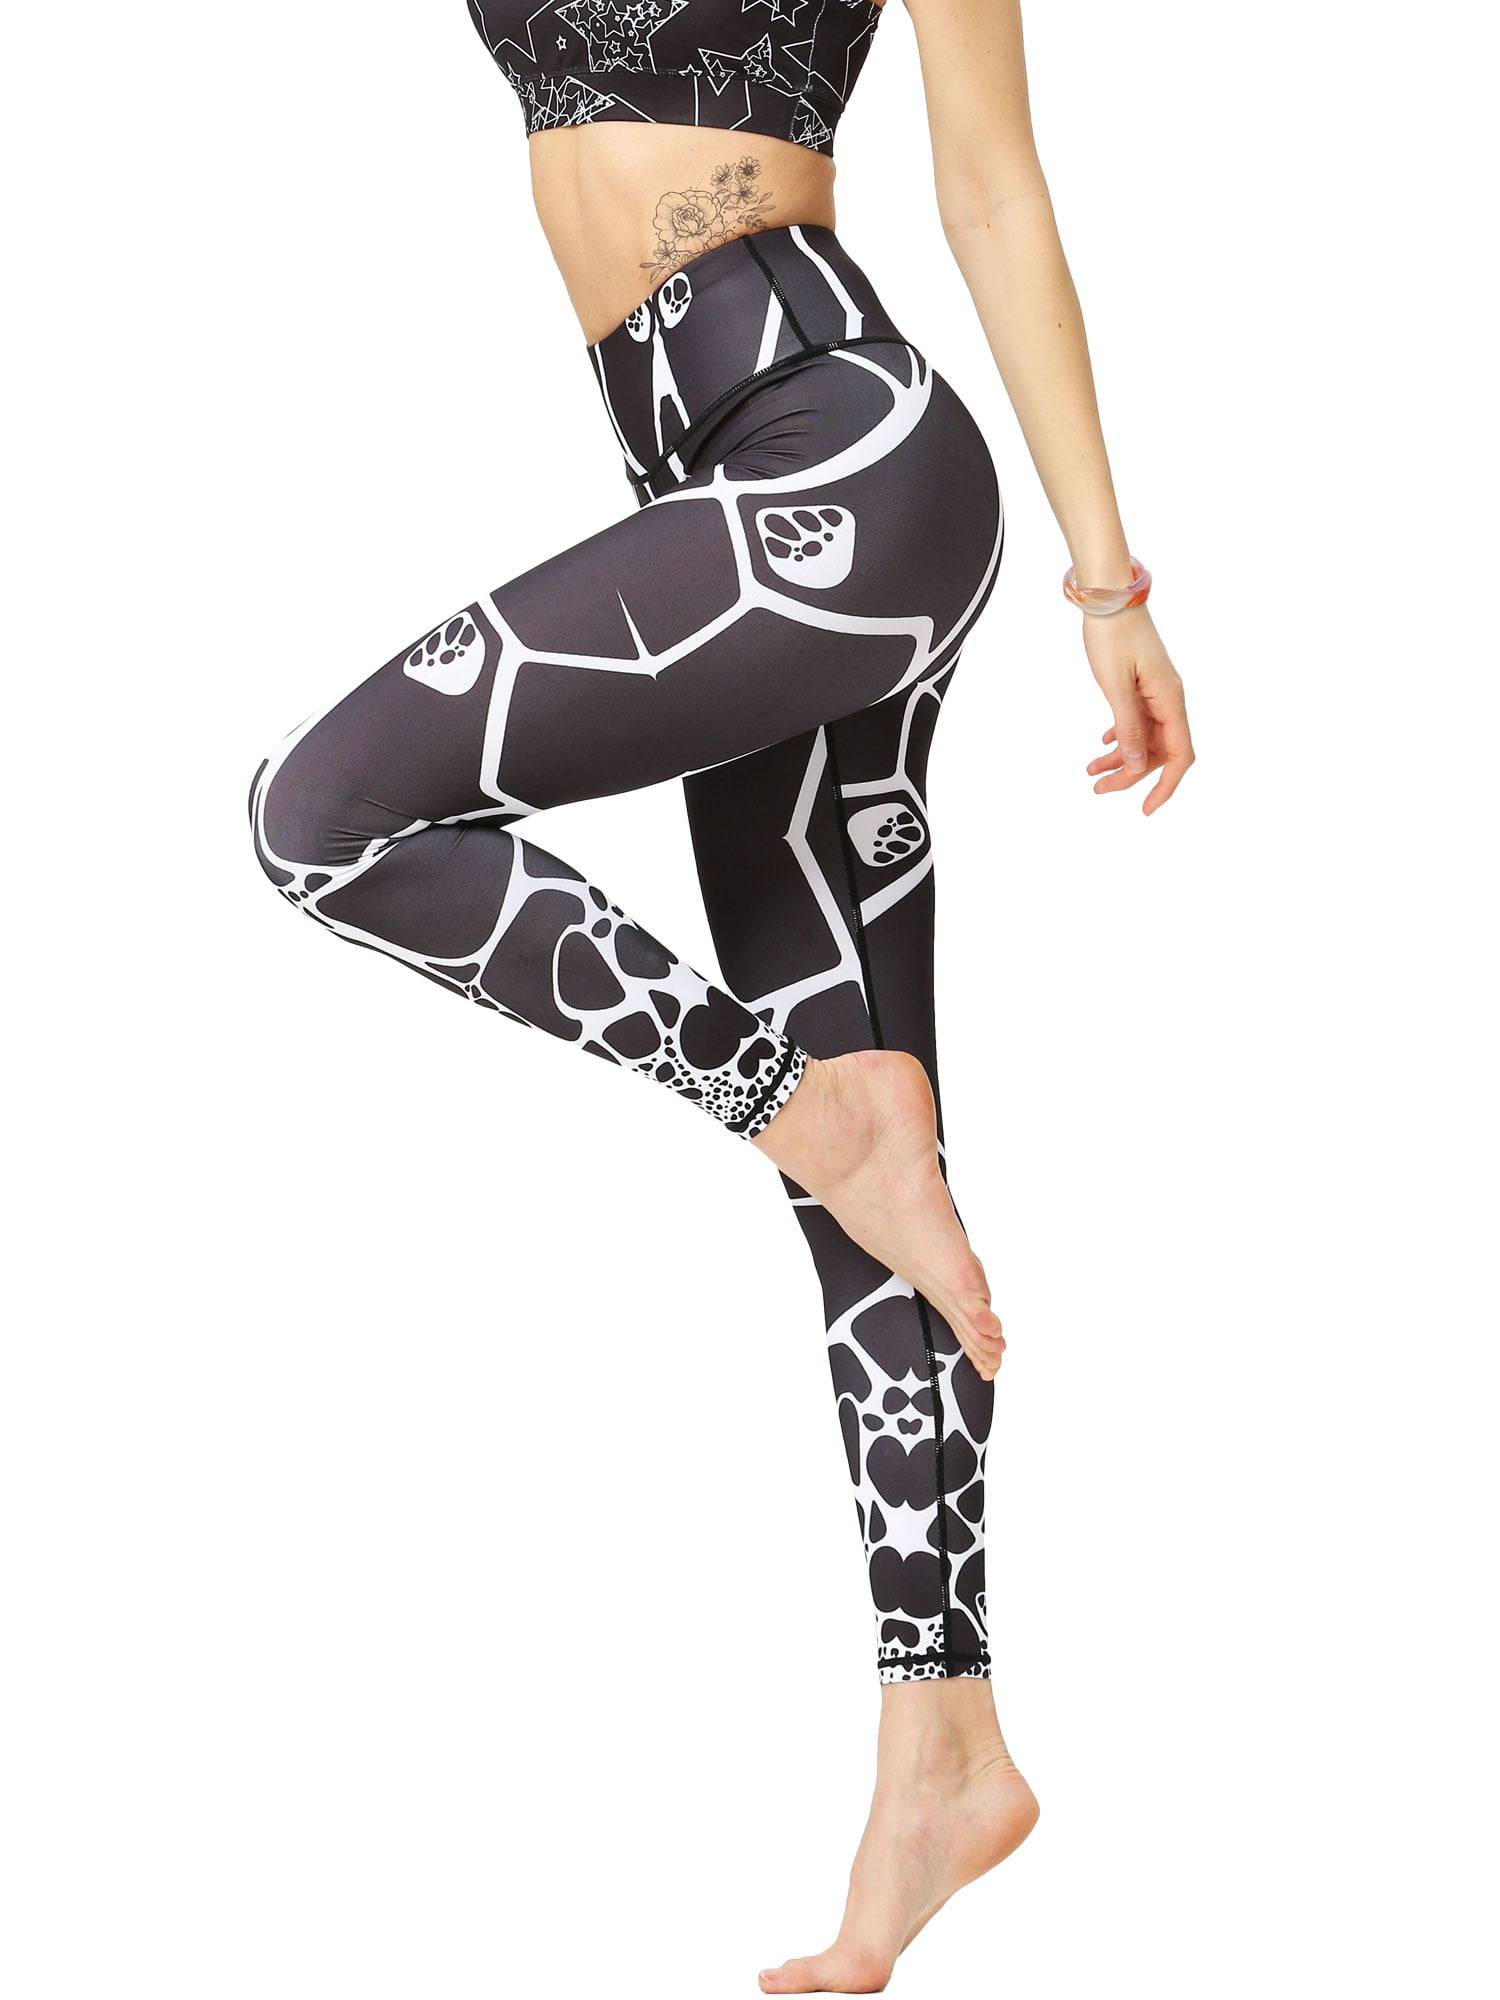 Details about   Womens High Waist Gym Leggings Pocket Fitness Sports Running Train Yoga Pants r 